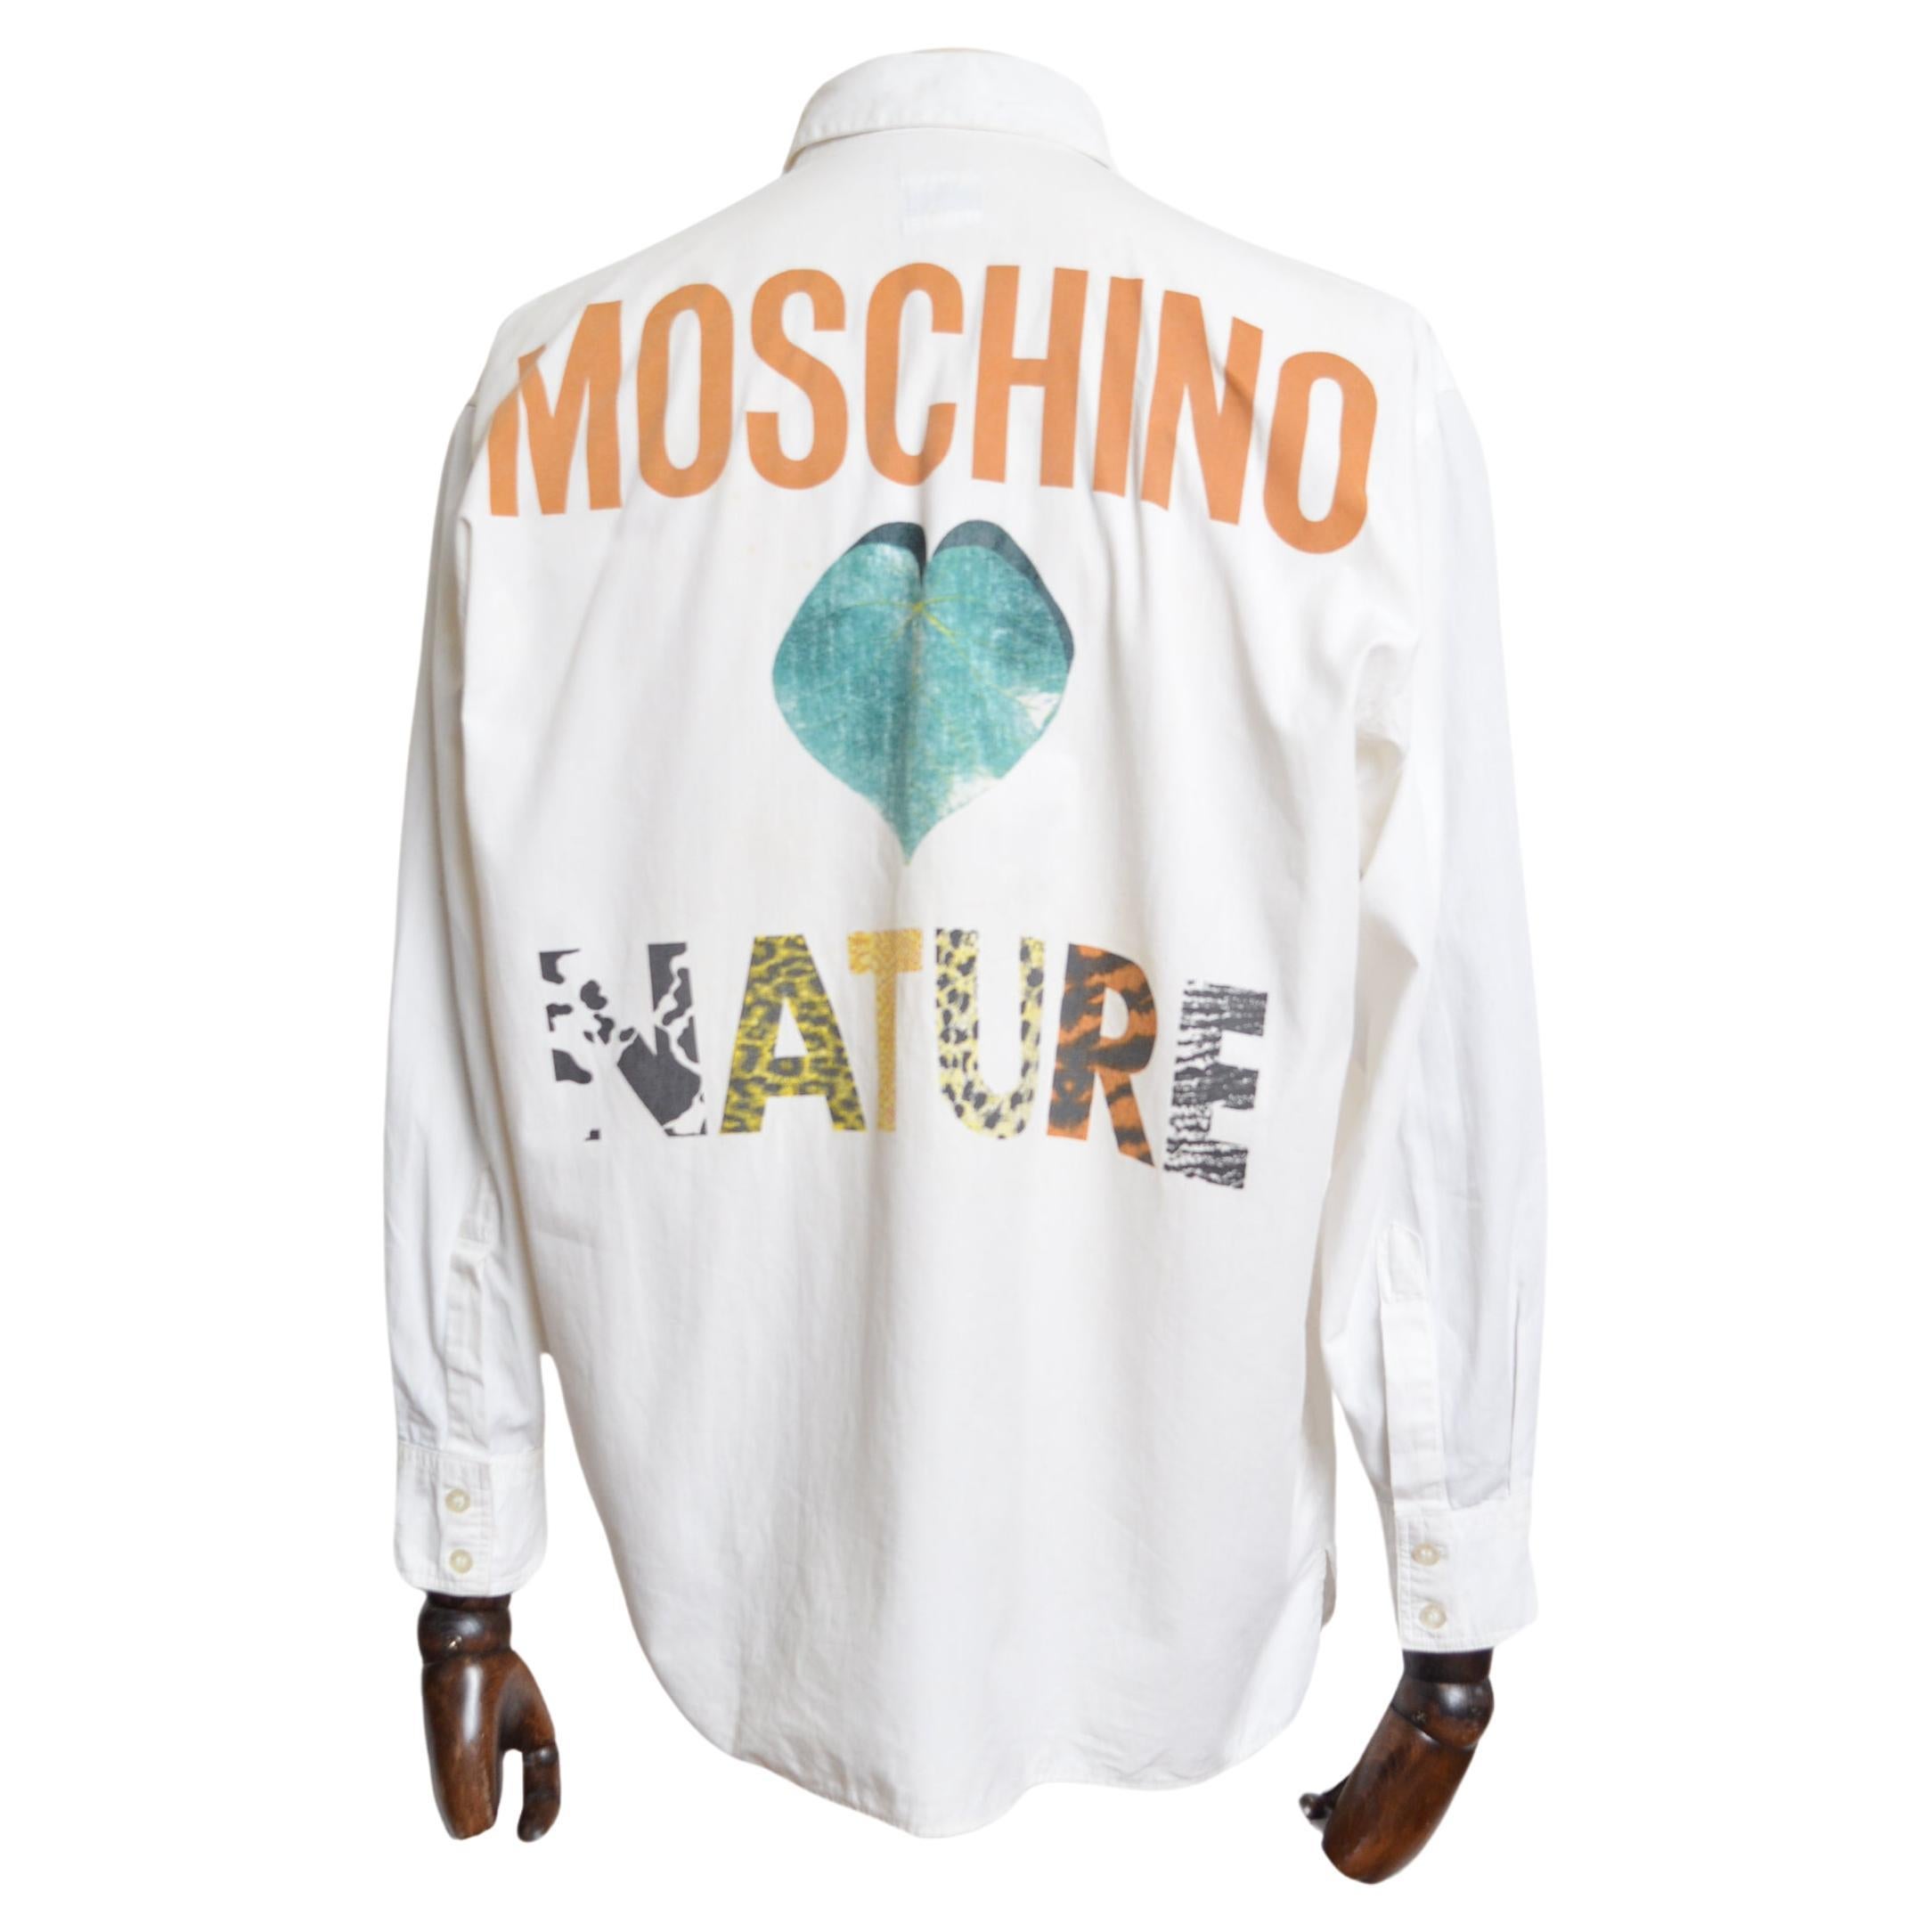 Early 1990's UK Garage Era 'MOSCHINO' Long sleeved Summer Shirt, crafted from a white printed Cotton with Large back hit across the reverse with the Slogan ' MOSCHINO NATURE'.

MADE IN ITALY.   

Features: Buttons down the front, Collar, Long